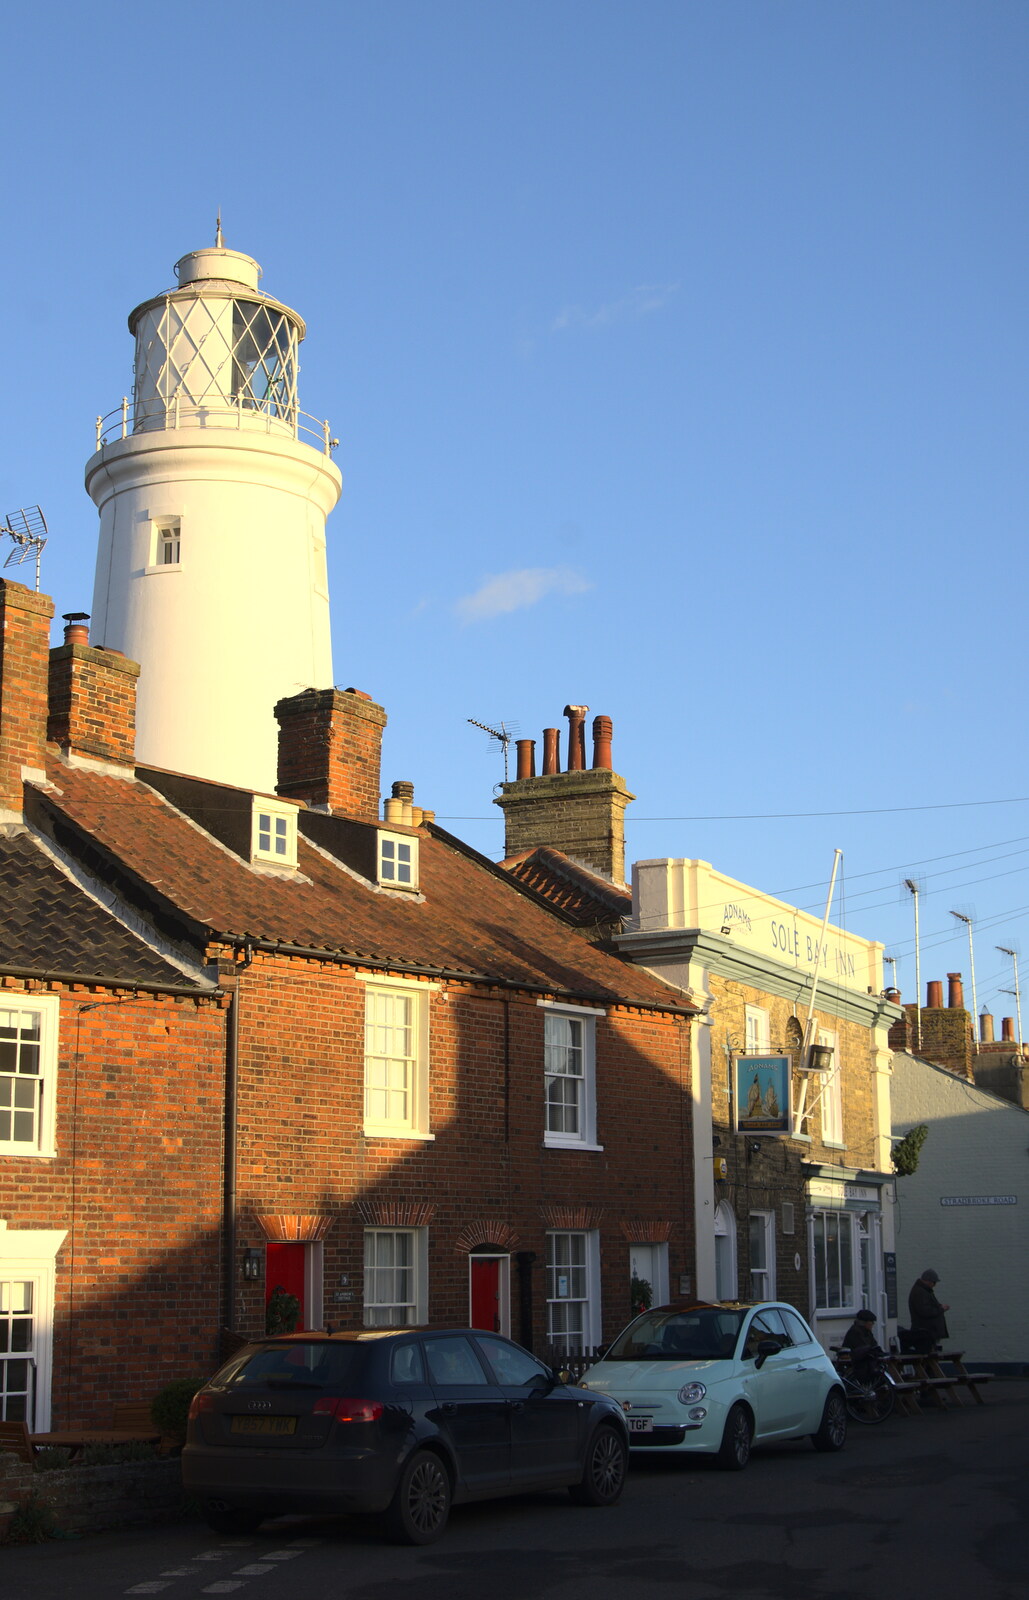 The lighthouse on St James Green from Boxing Day in Southwold, Suffolk - 26th December 2016